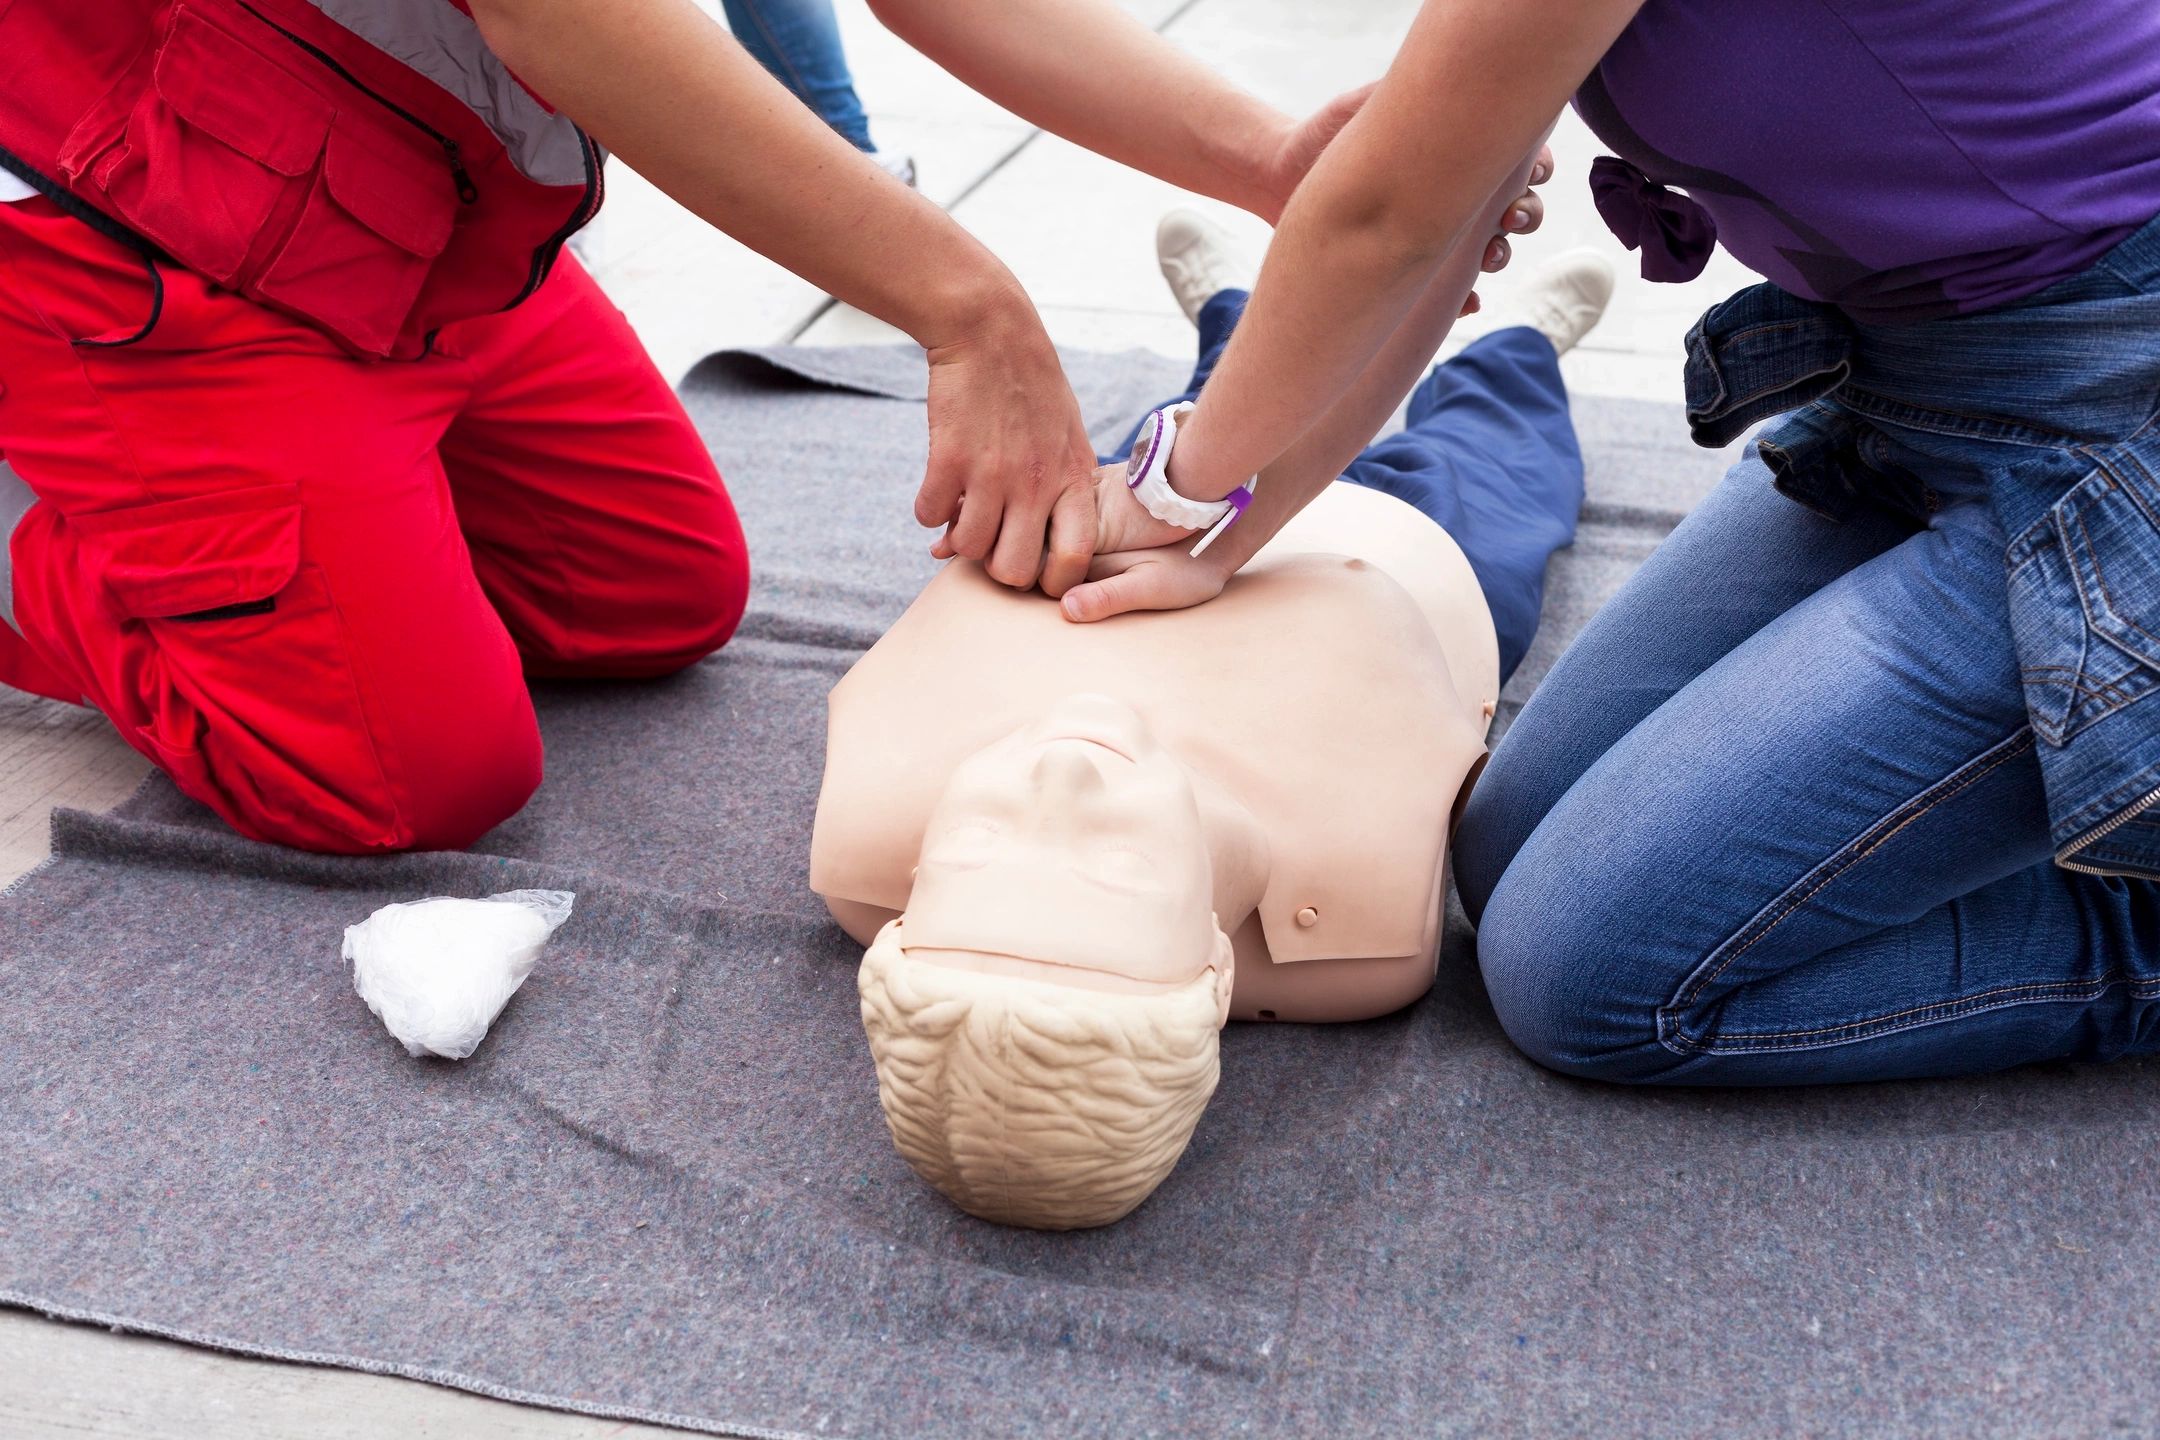 CPR Certification Partners - CPR Classes, CPR Certification